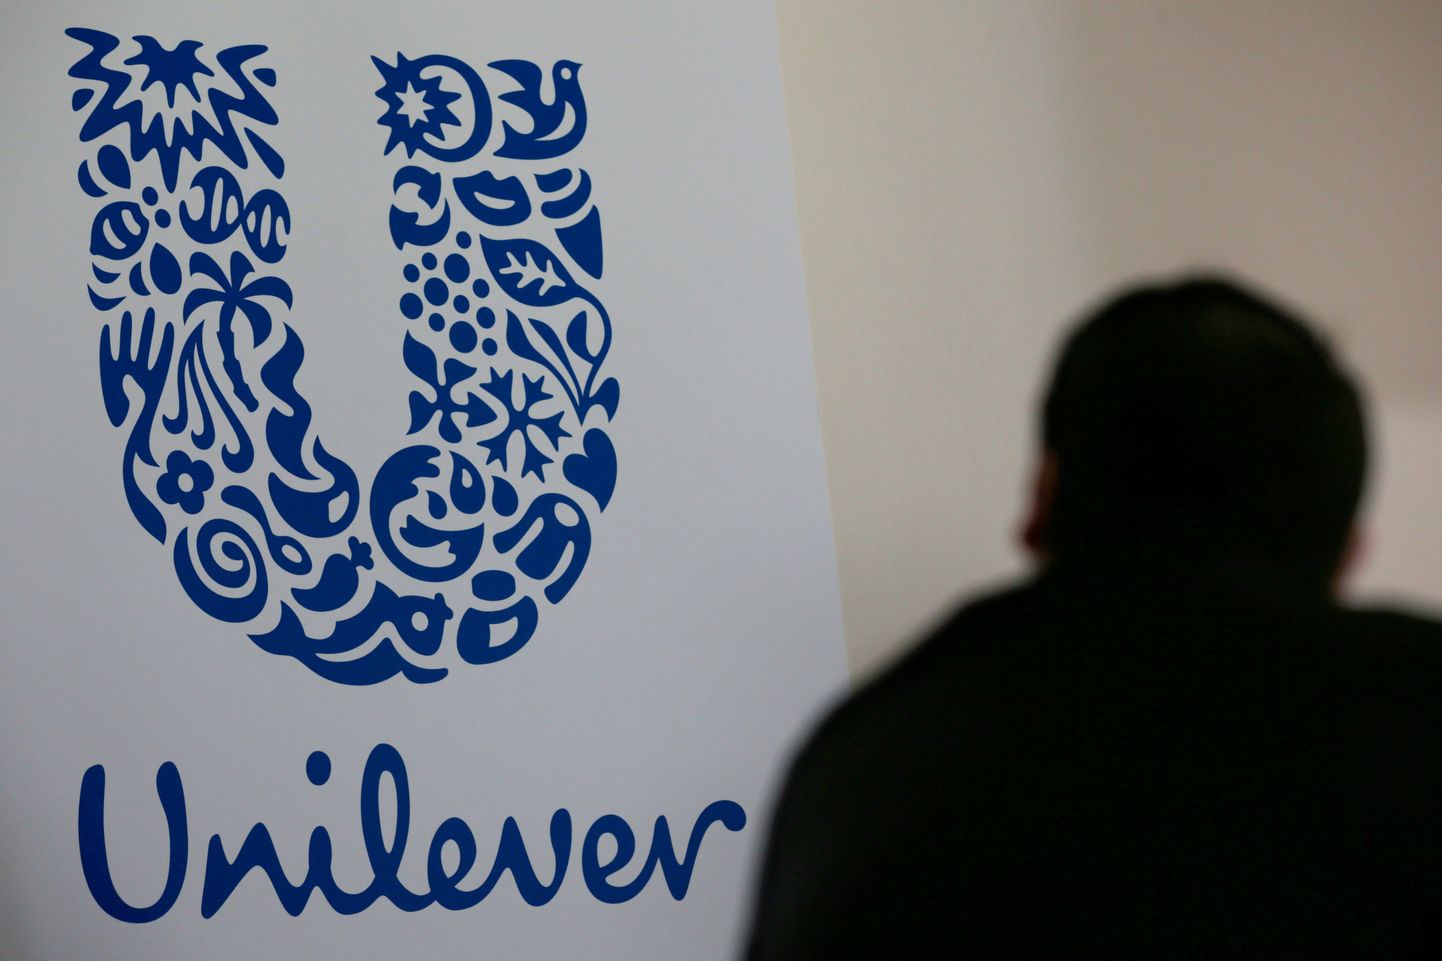 The logo of the Unilever group is seen at the Miko factory in Saint-Dizier, France, May 4, 2016. REUTERS/Philippe Wojazer/File Photo    GLOBAL BUSINESS WEEK AHEAD PACKAGE - SEARCH "BUSINESS WEEK AHEAD JULY 18" FOR ALL IMAGES